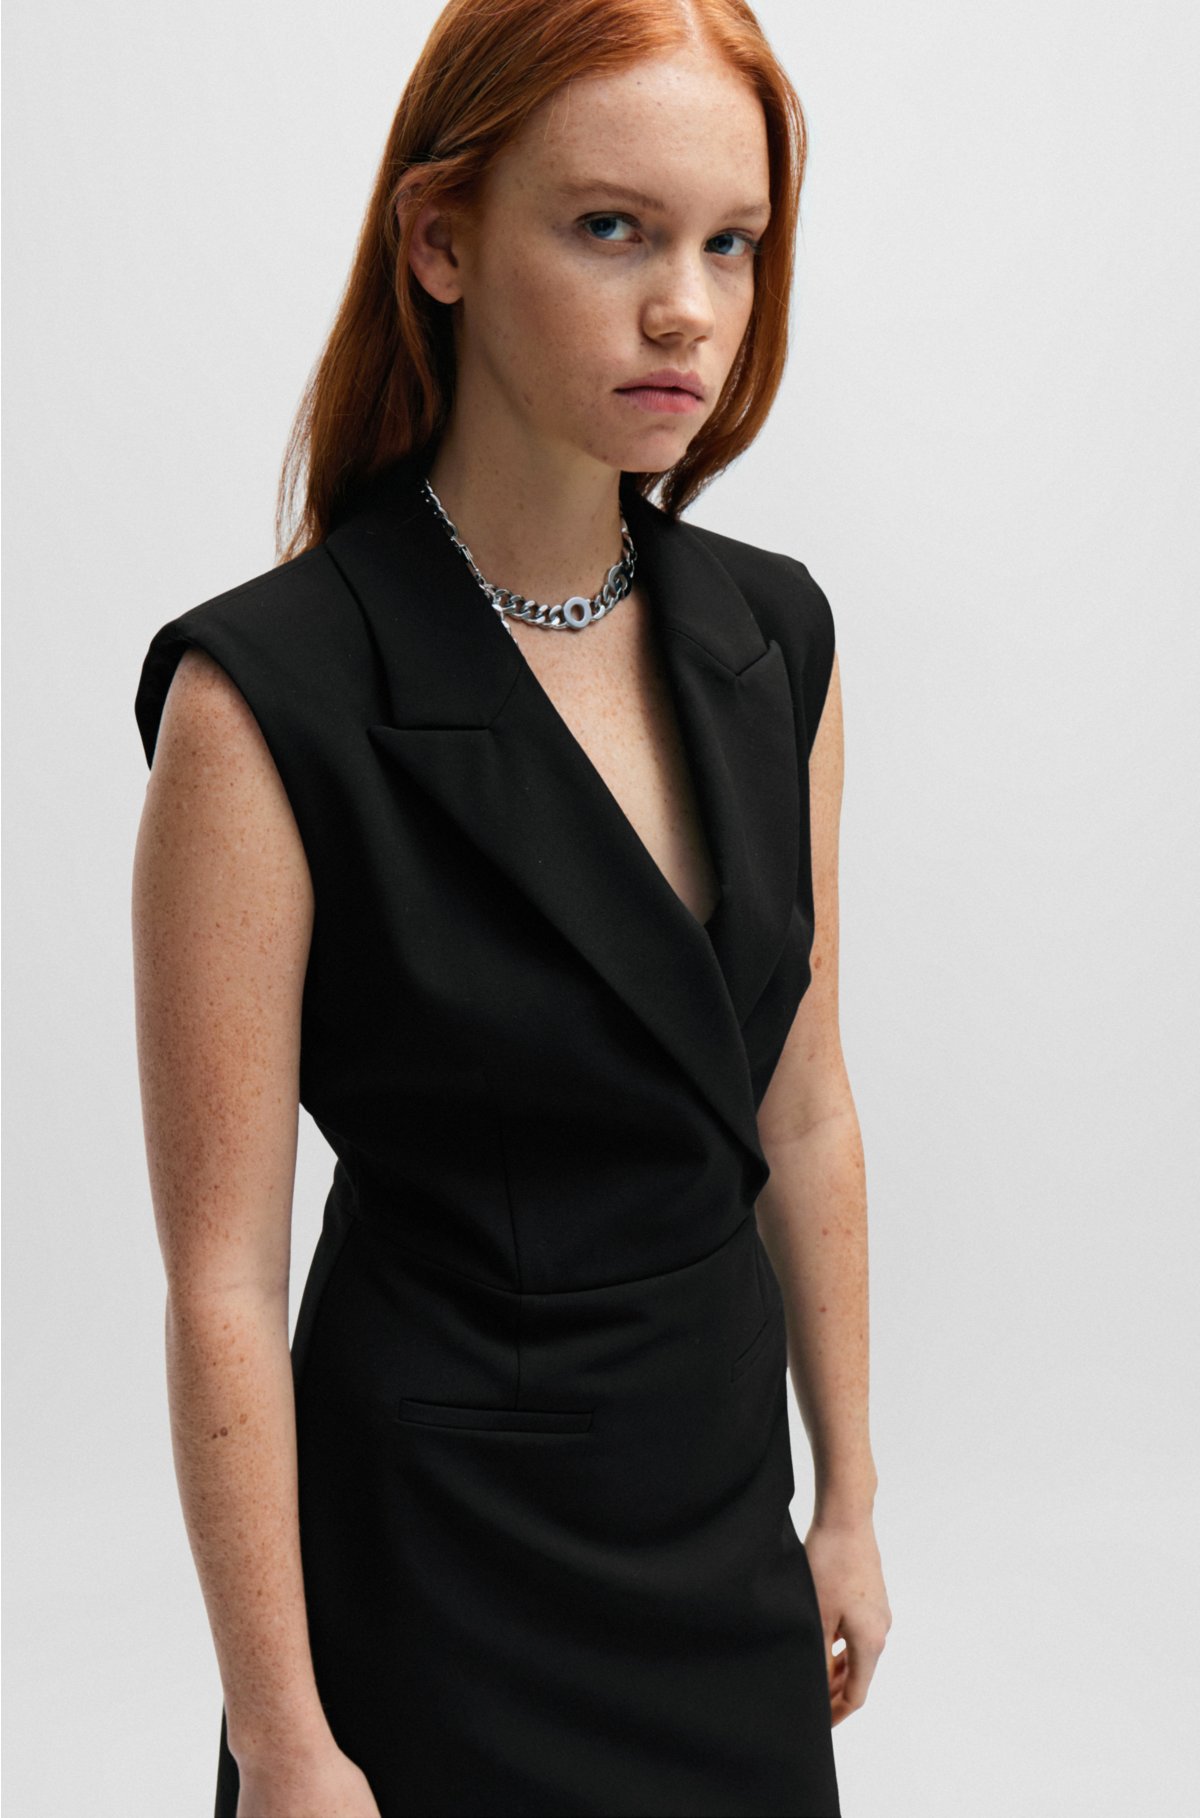 Slim-fit tailored dress with lapels and logo patch, Black